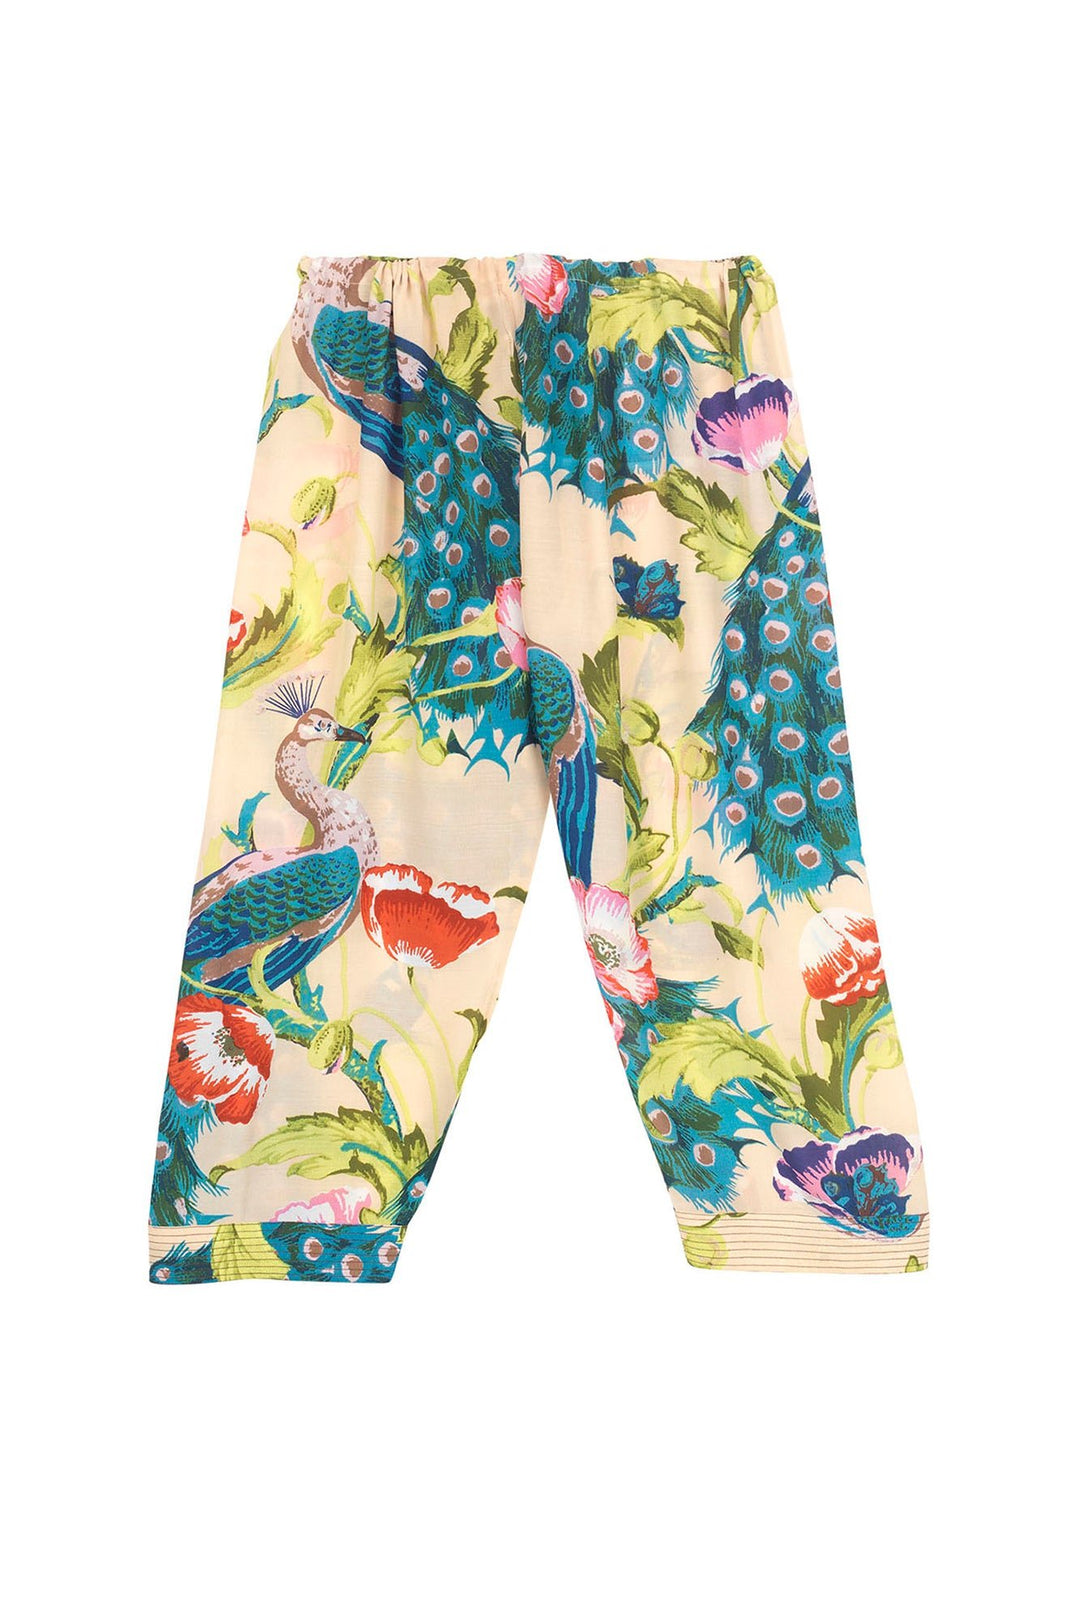 Peacock and Poppies Sand Lounge Pants - One Hundred Stars